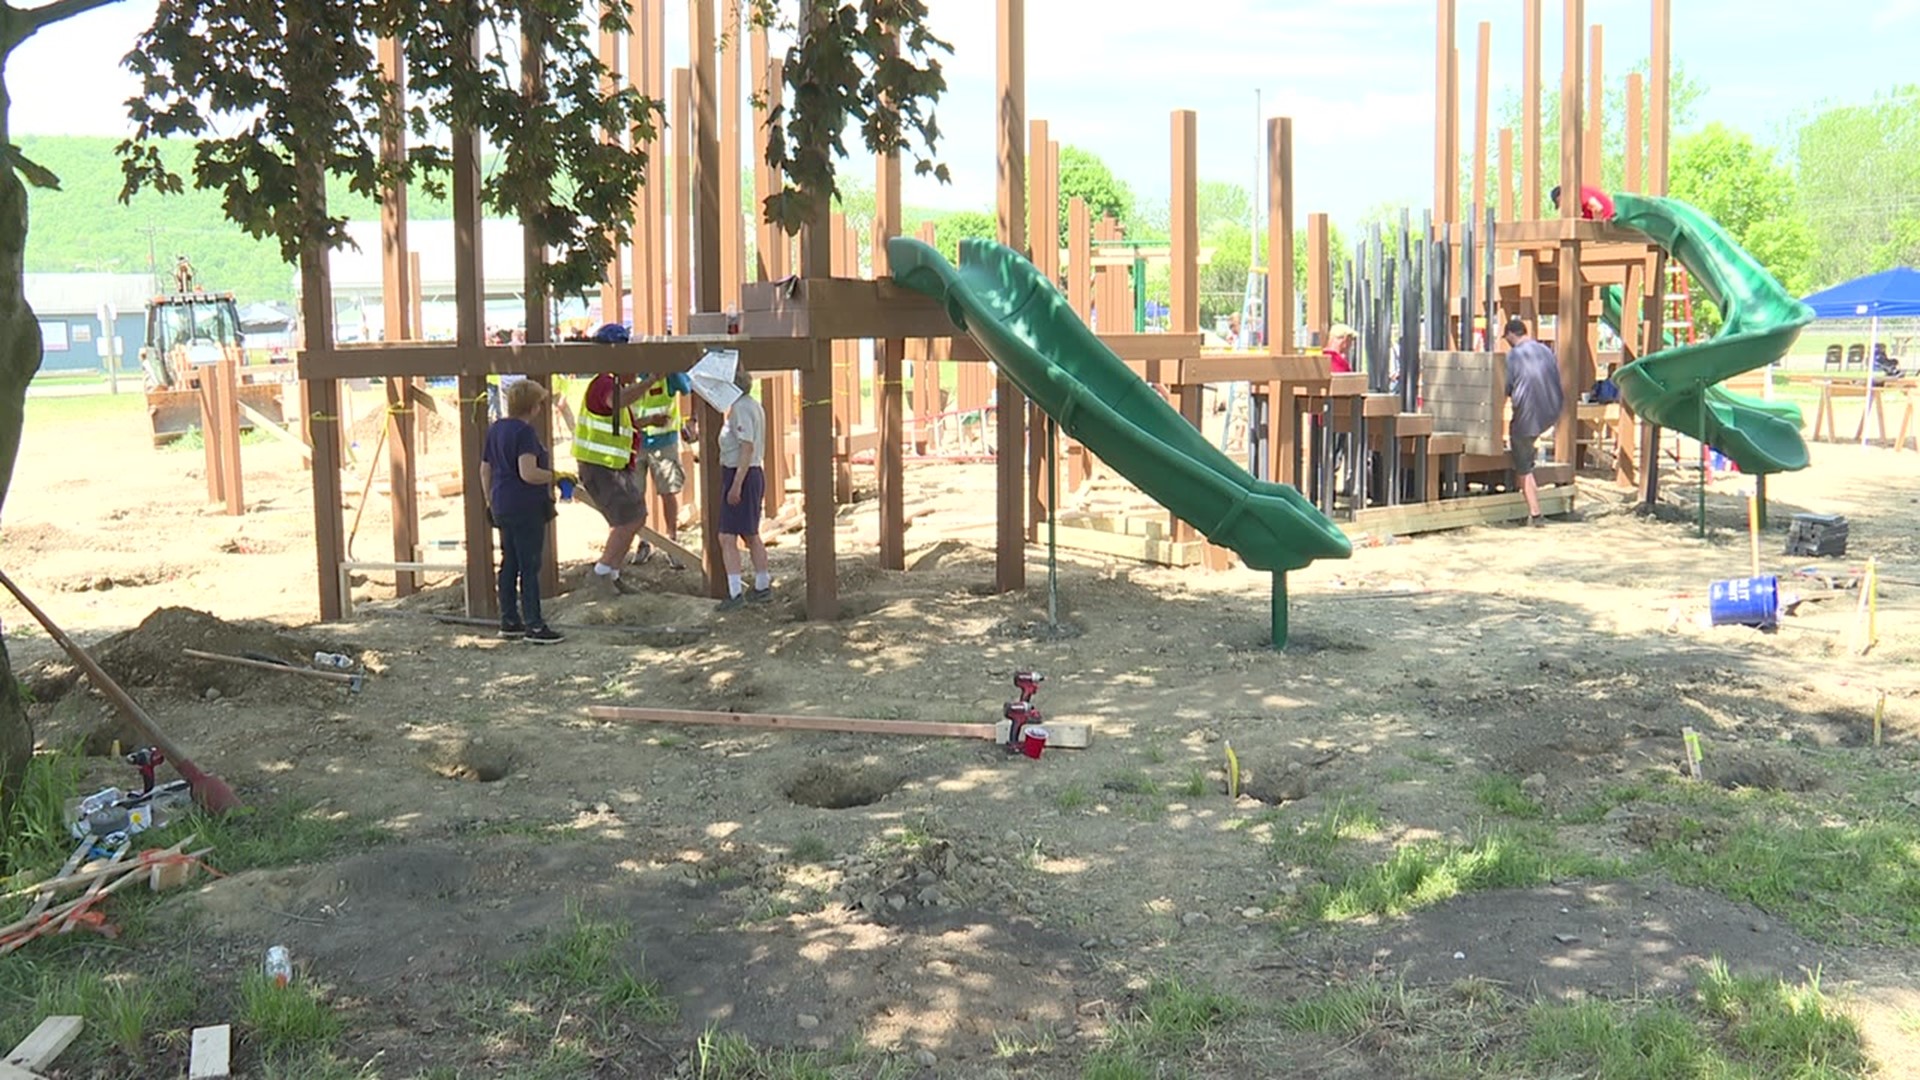 After about 10 years of planning, five years of fundraising, and a yearlong hiatus, a playground in Bradford County is finally getting a much-needed makeover.